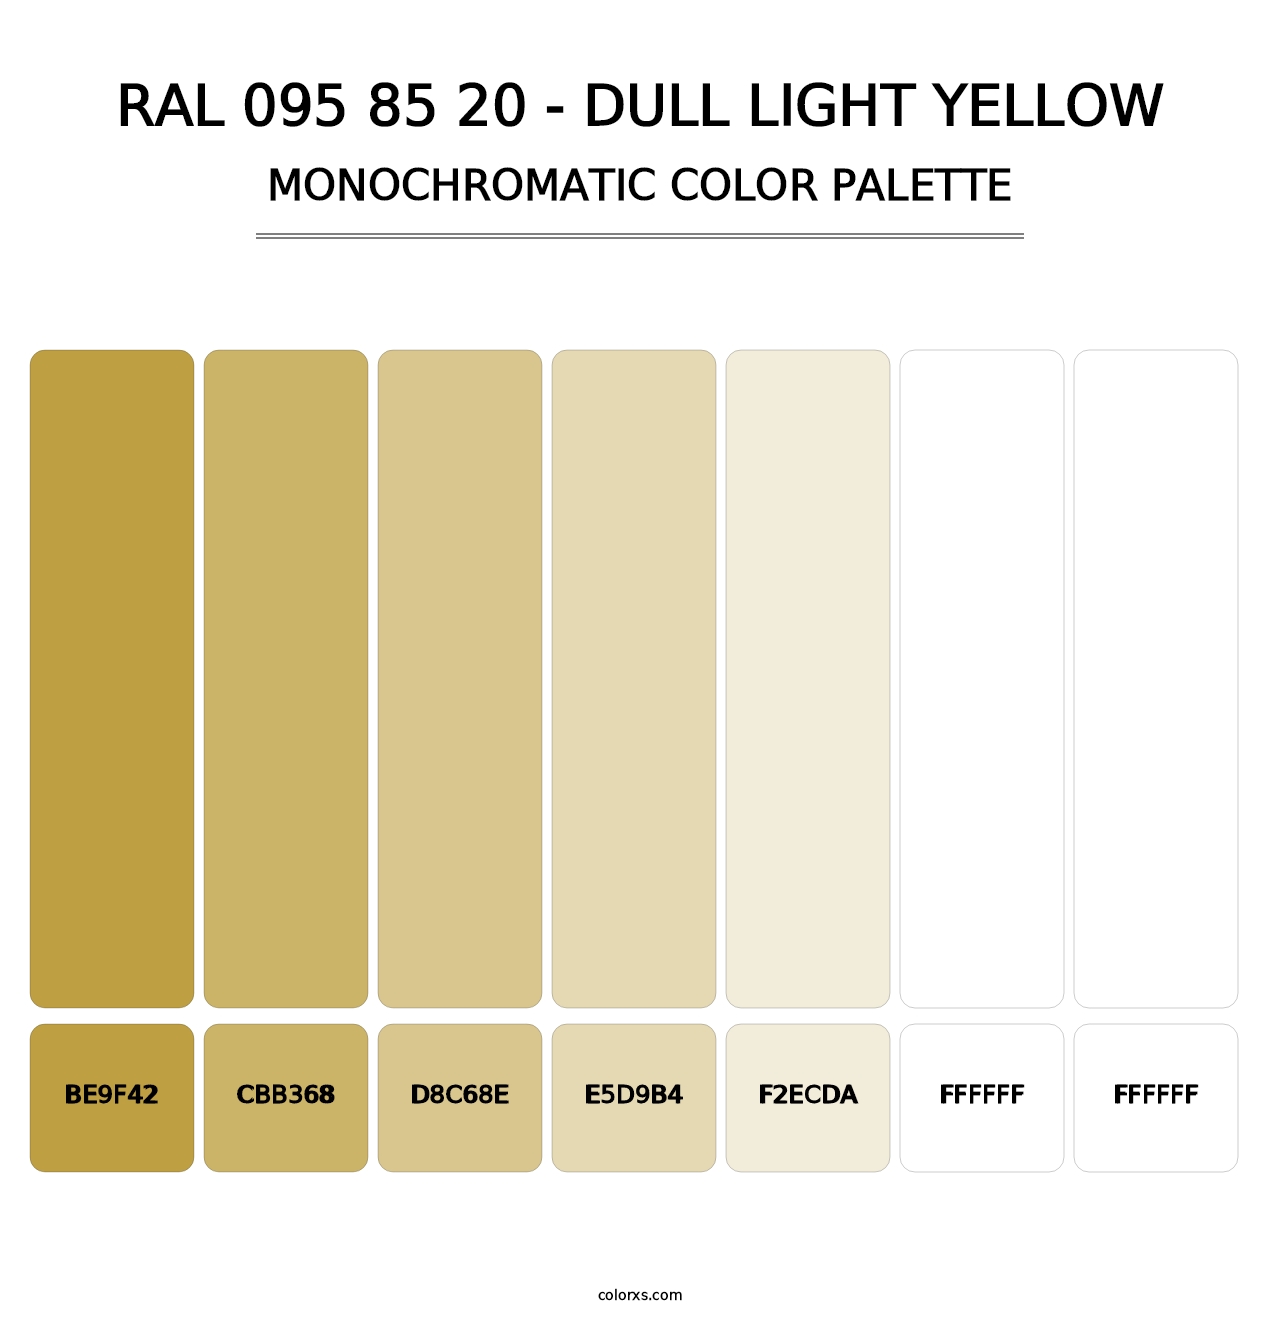 RAL 095 85 20 - Dull Light Yellow - Monochromatic Color Palette